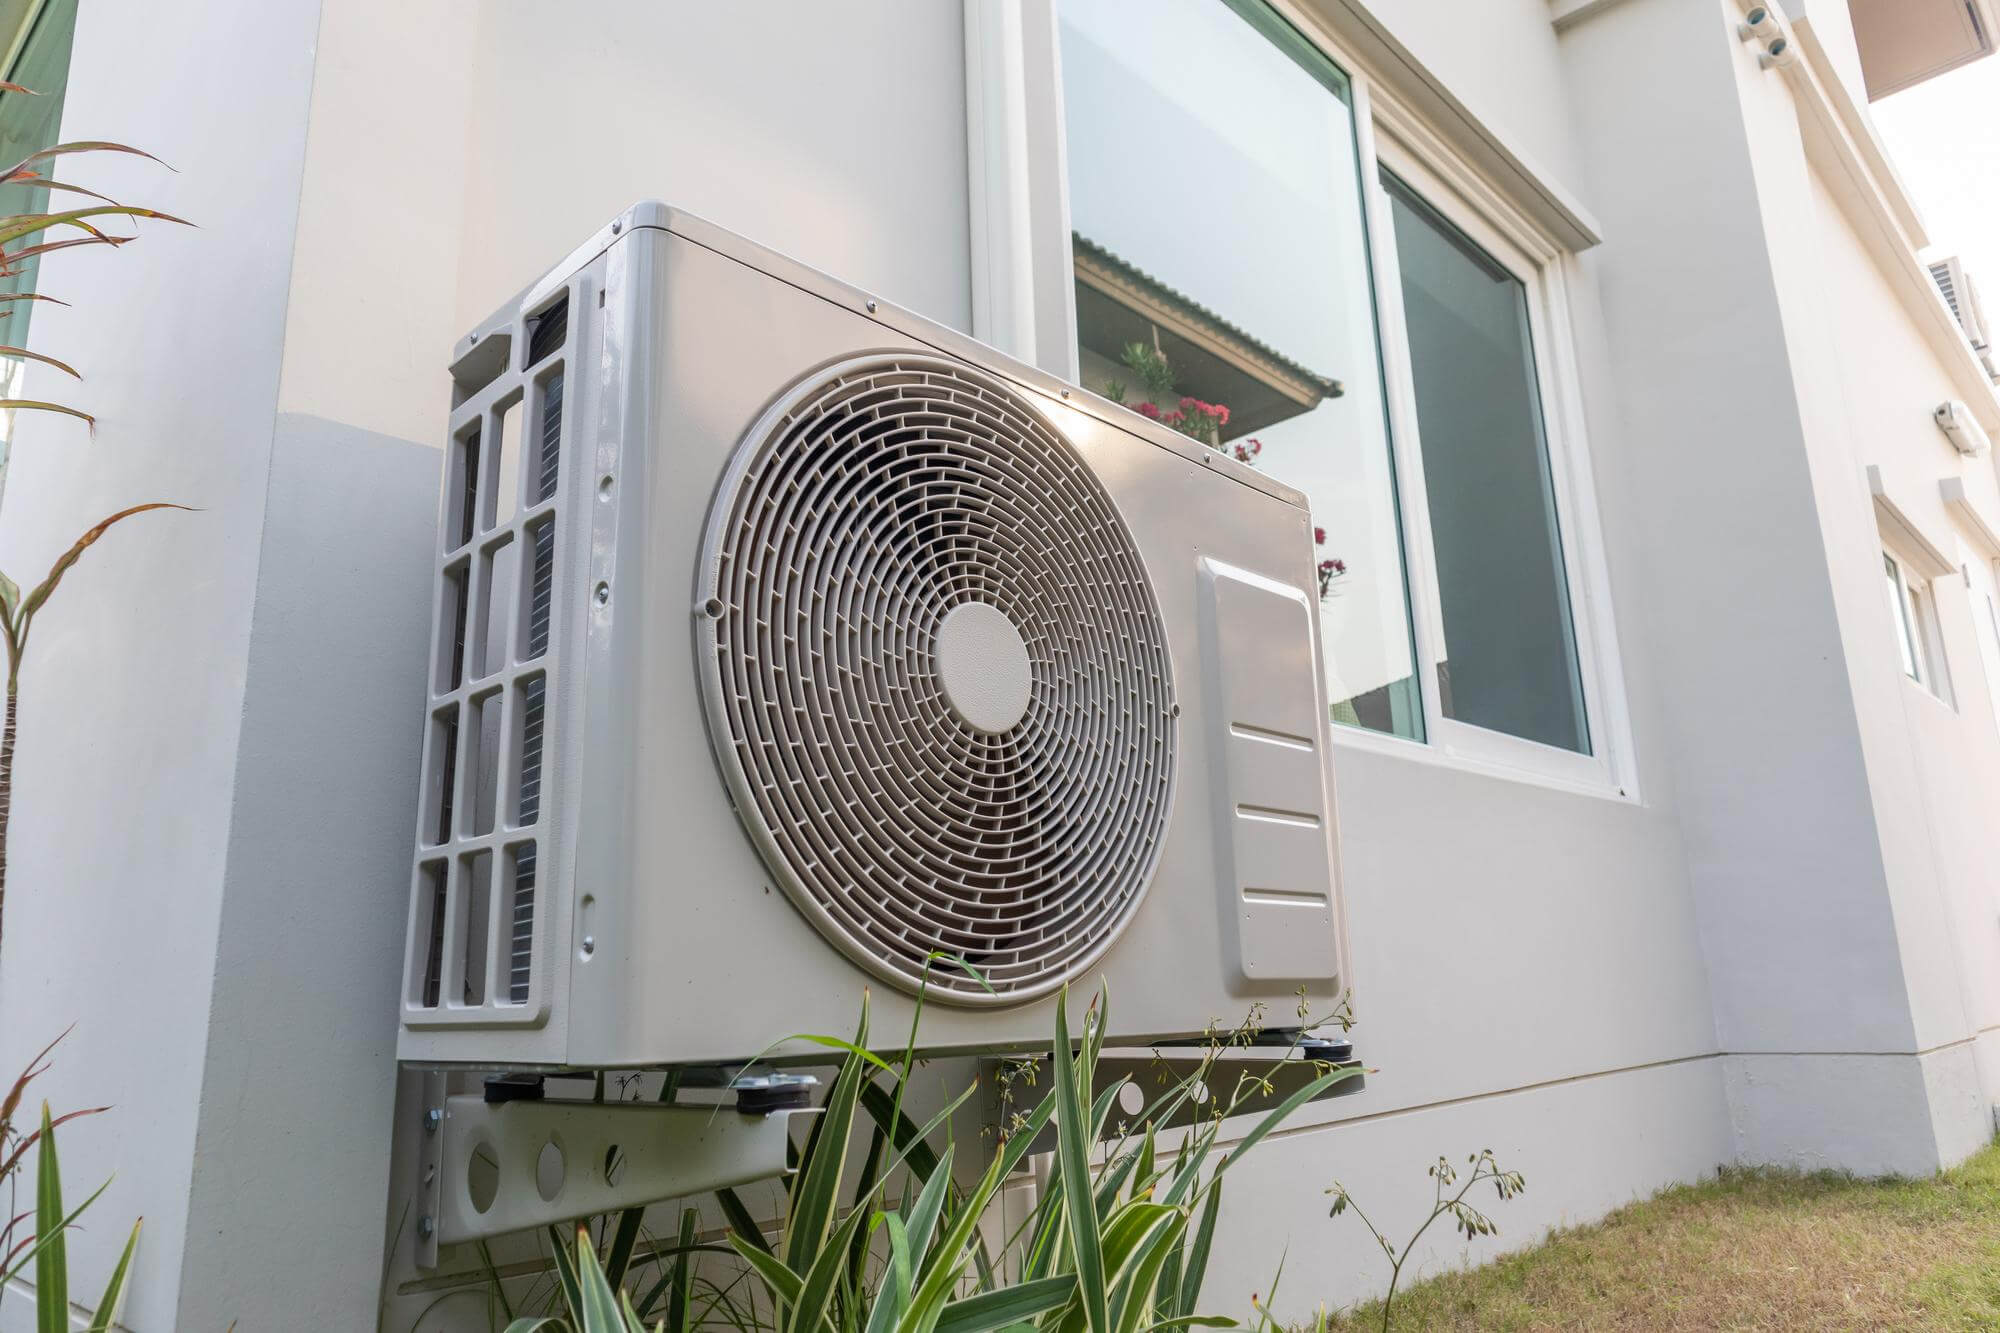 AC repair or replacement blog featured image of a mini-split system.